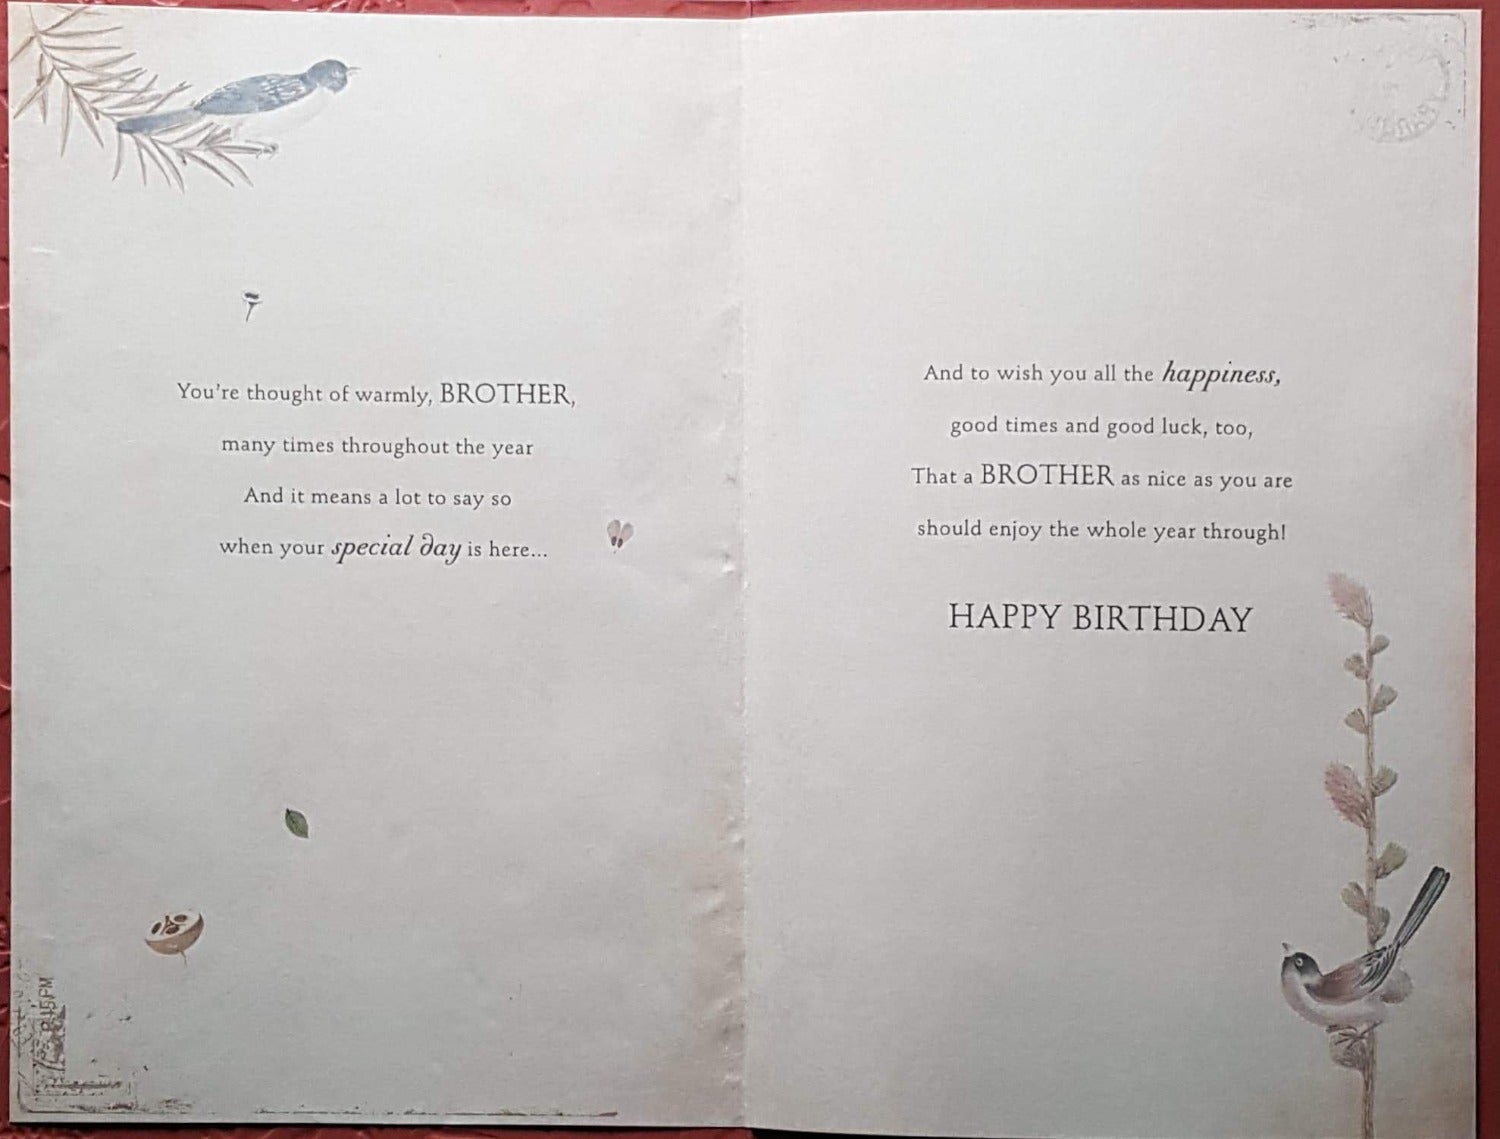 Birthday Card - Brother / A Floral Cover With Little Birds